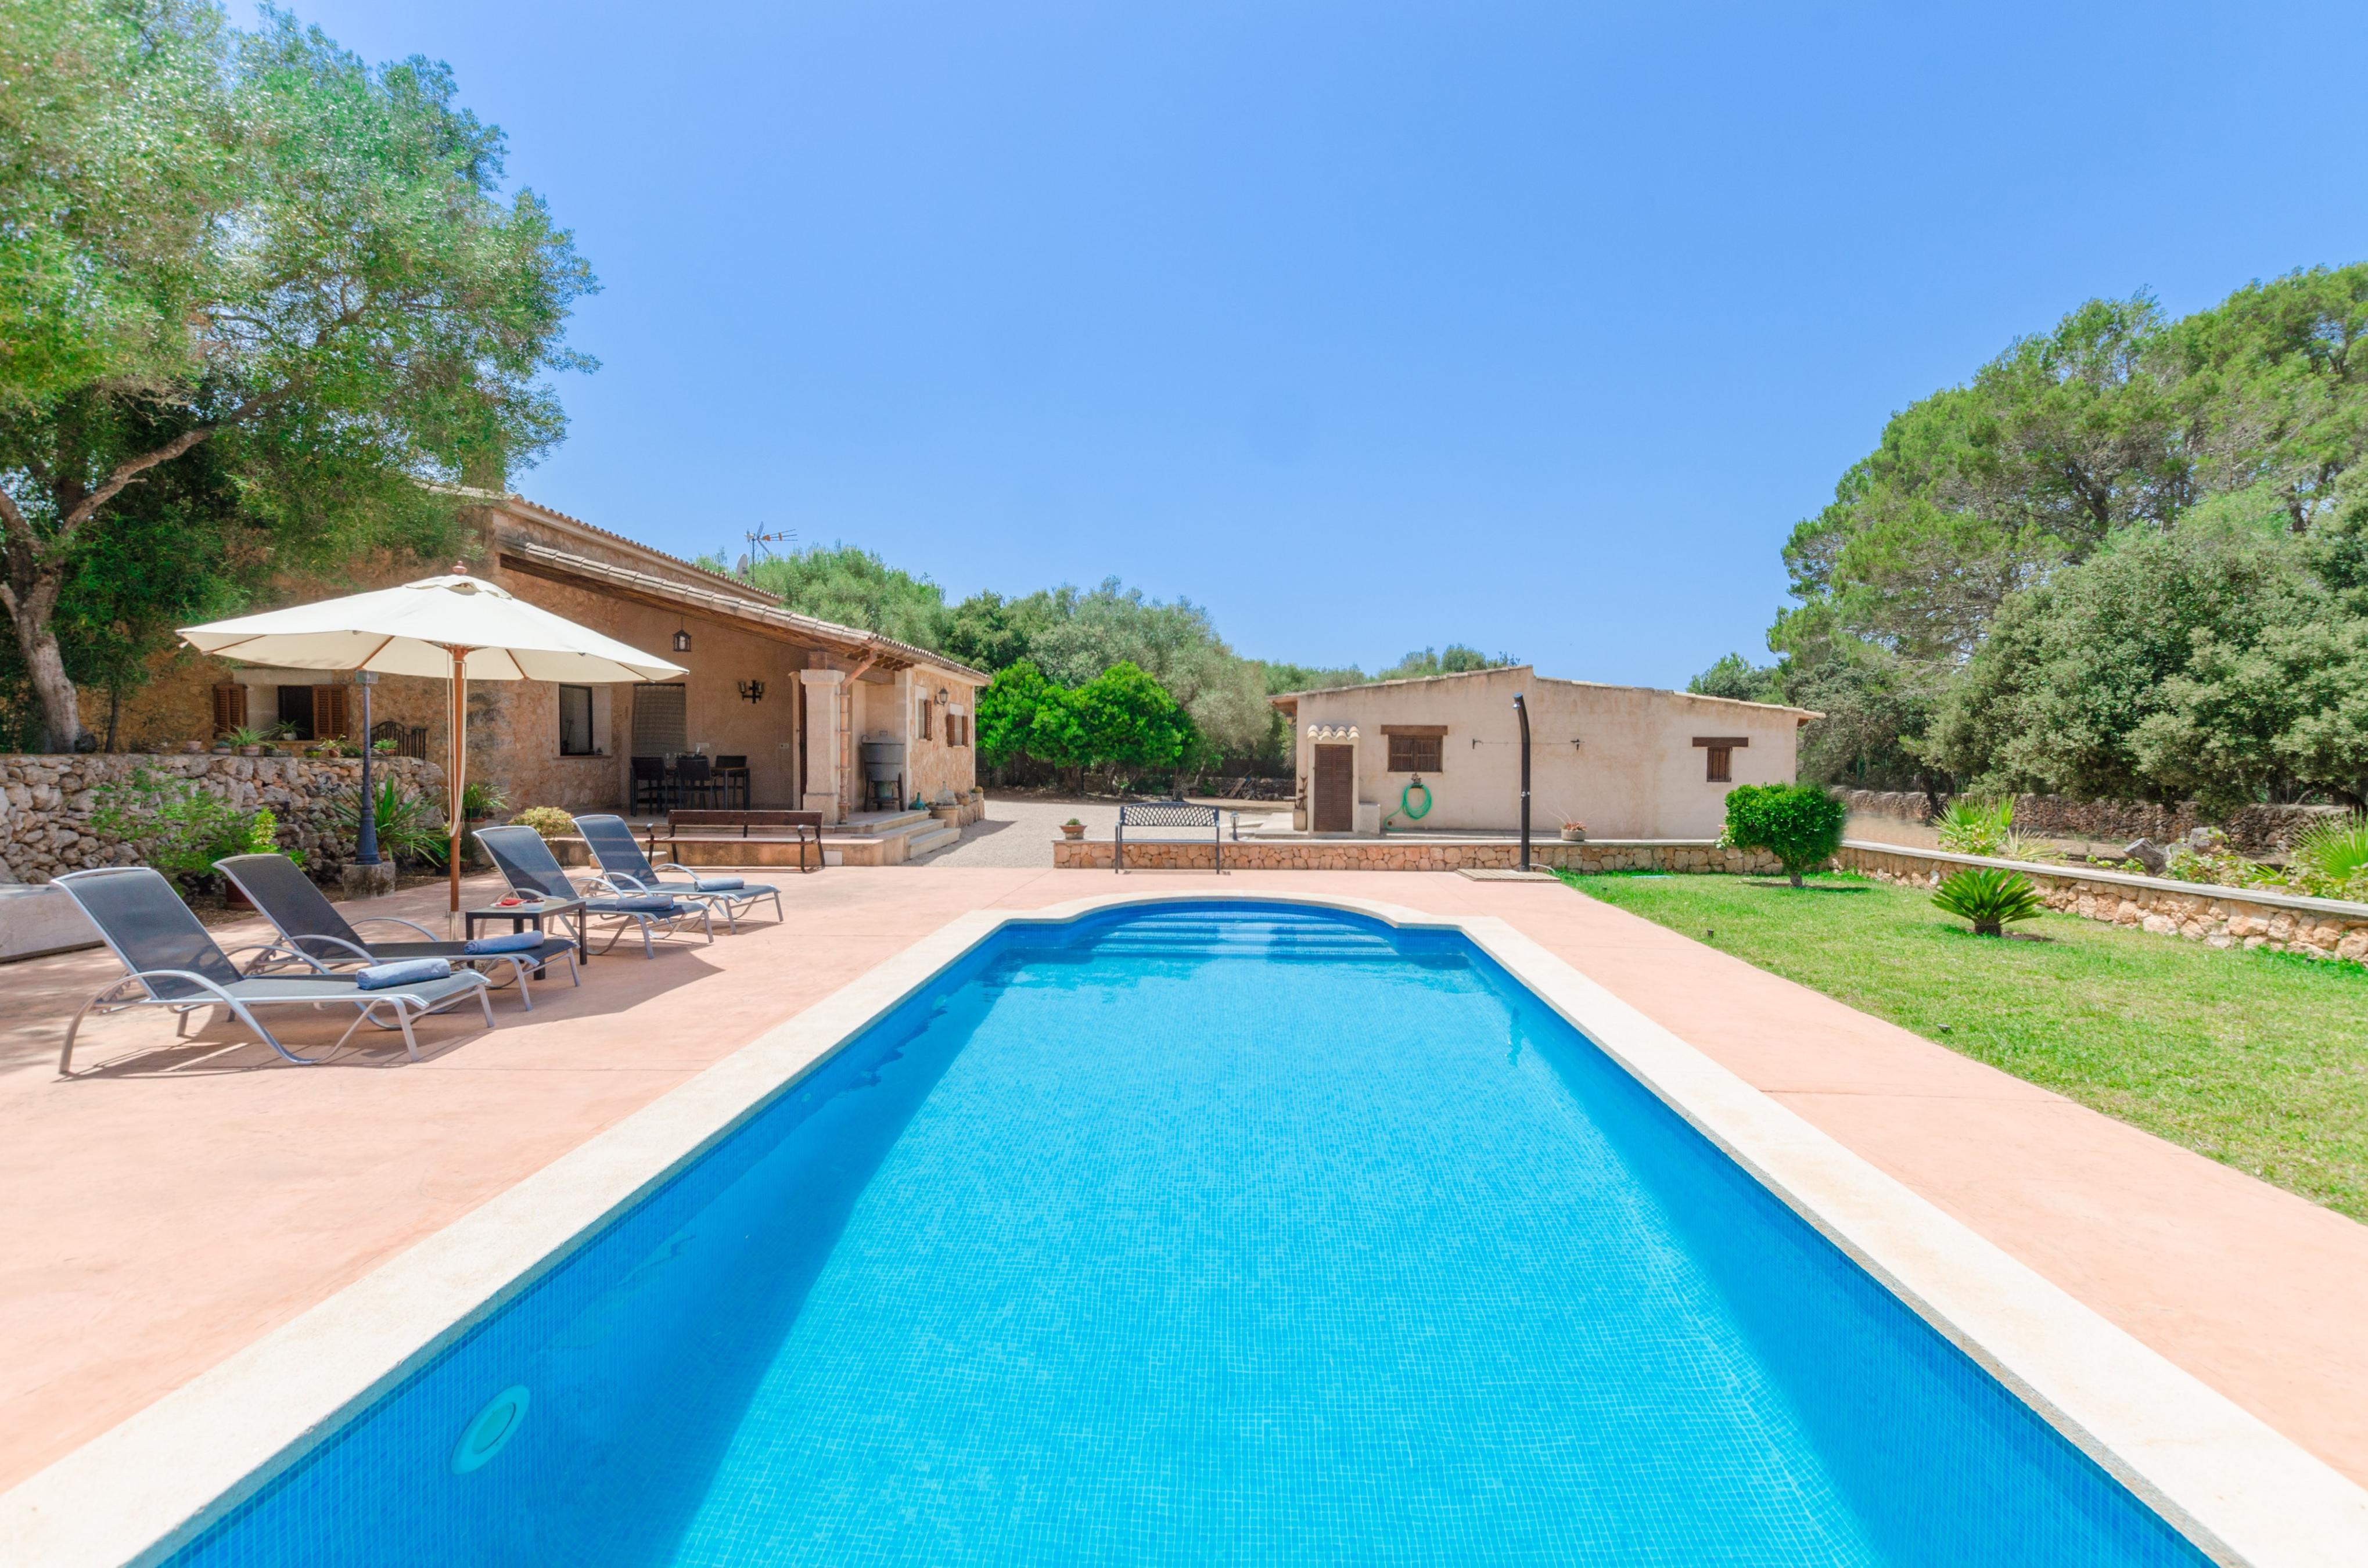 Property Image 2 - SON GARBI - Traditional villa with private pool in inland Mallorca. Free WiFi